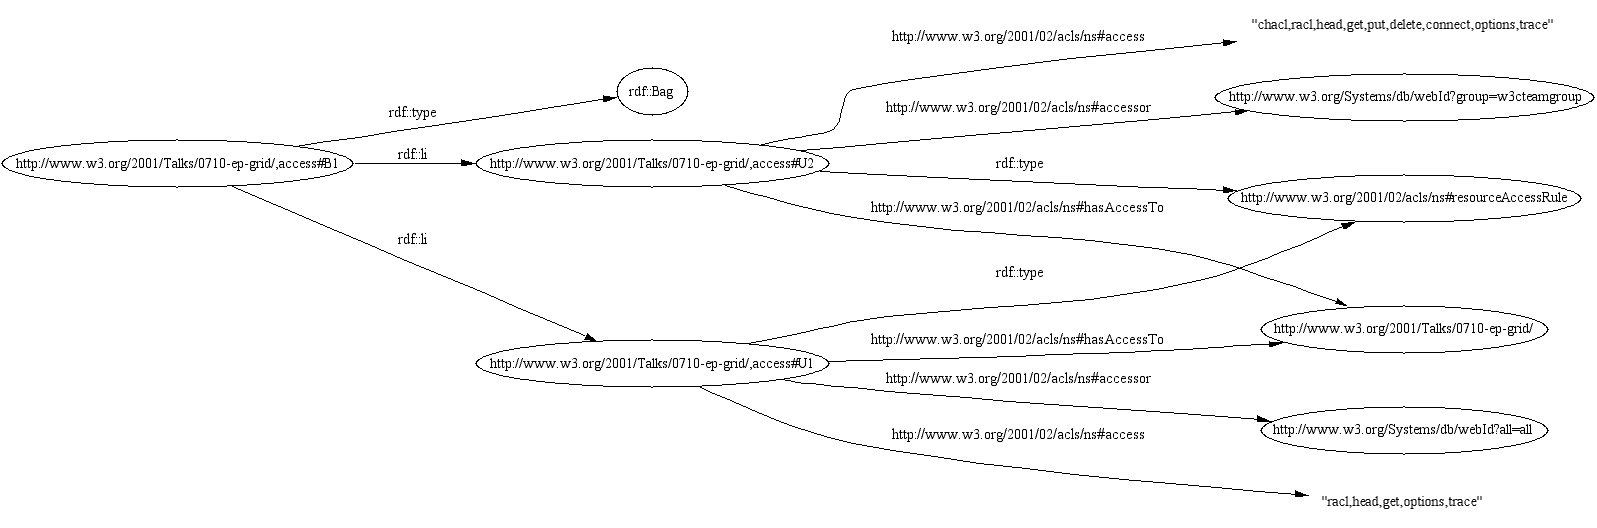 Directed labeled graph diagram showing access control assertions about this talk